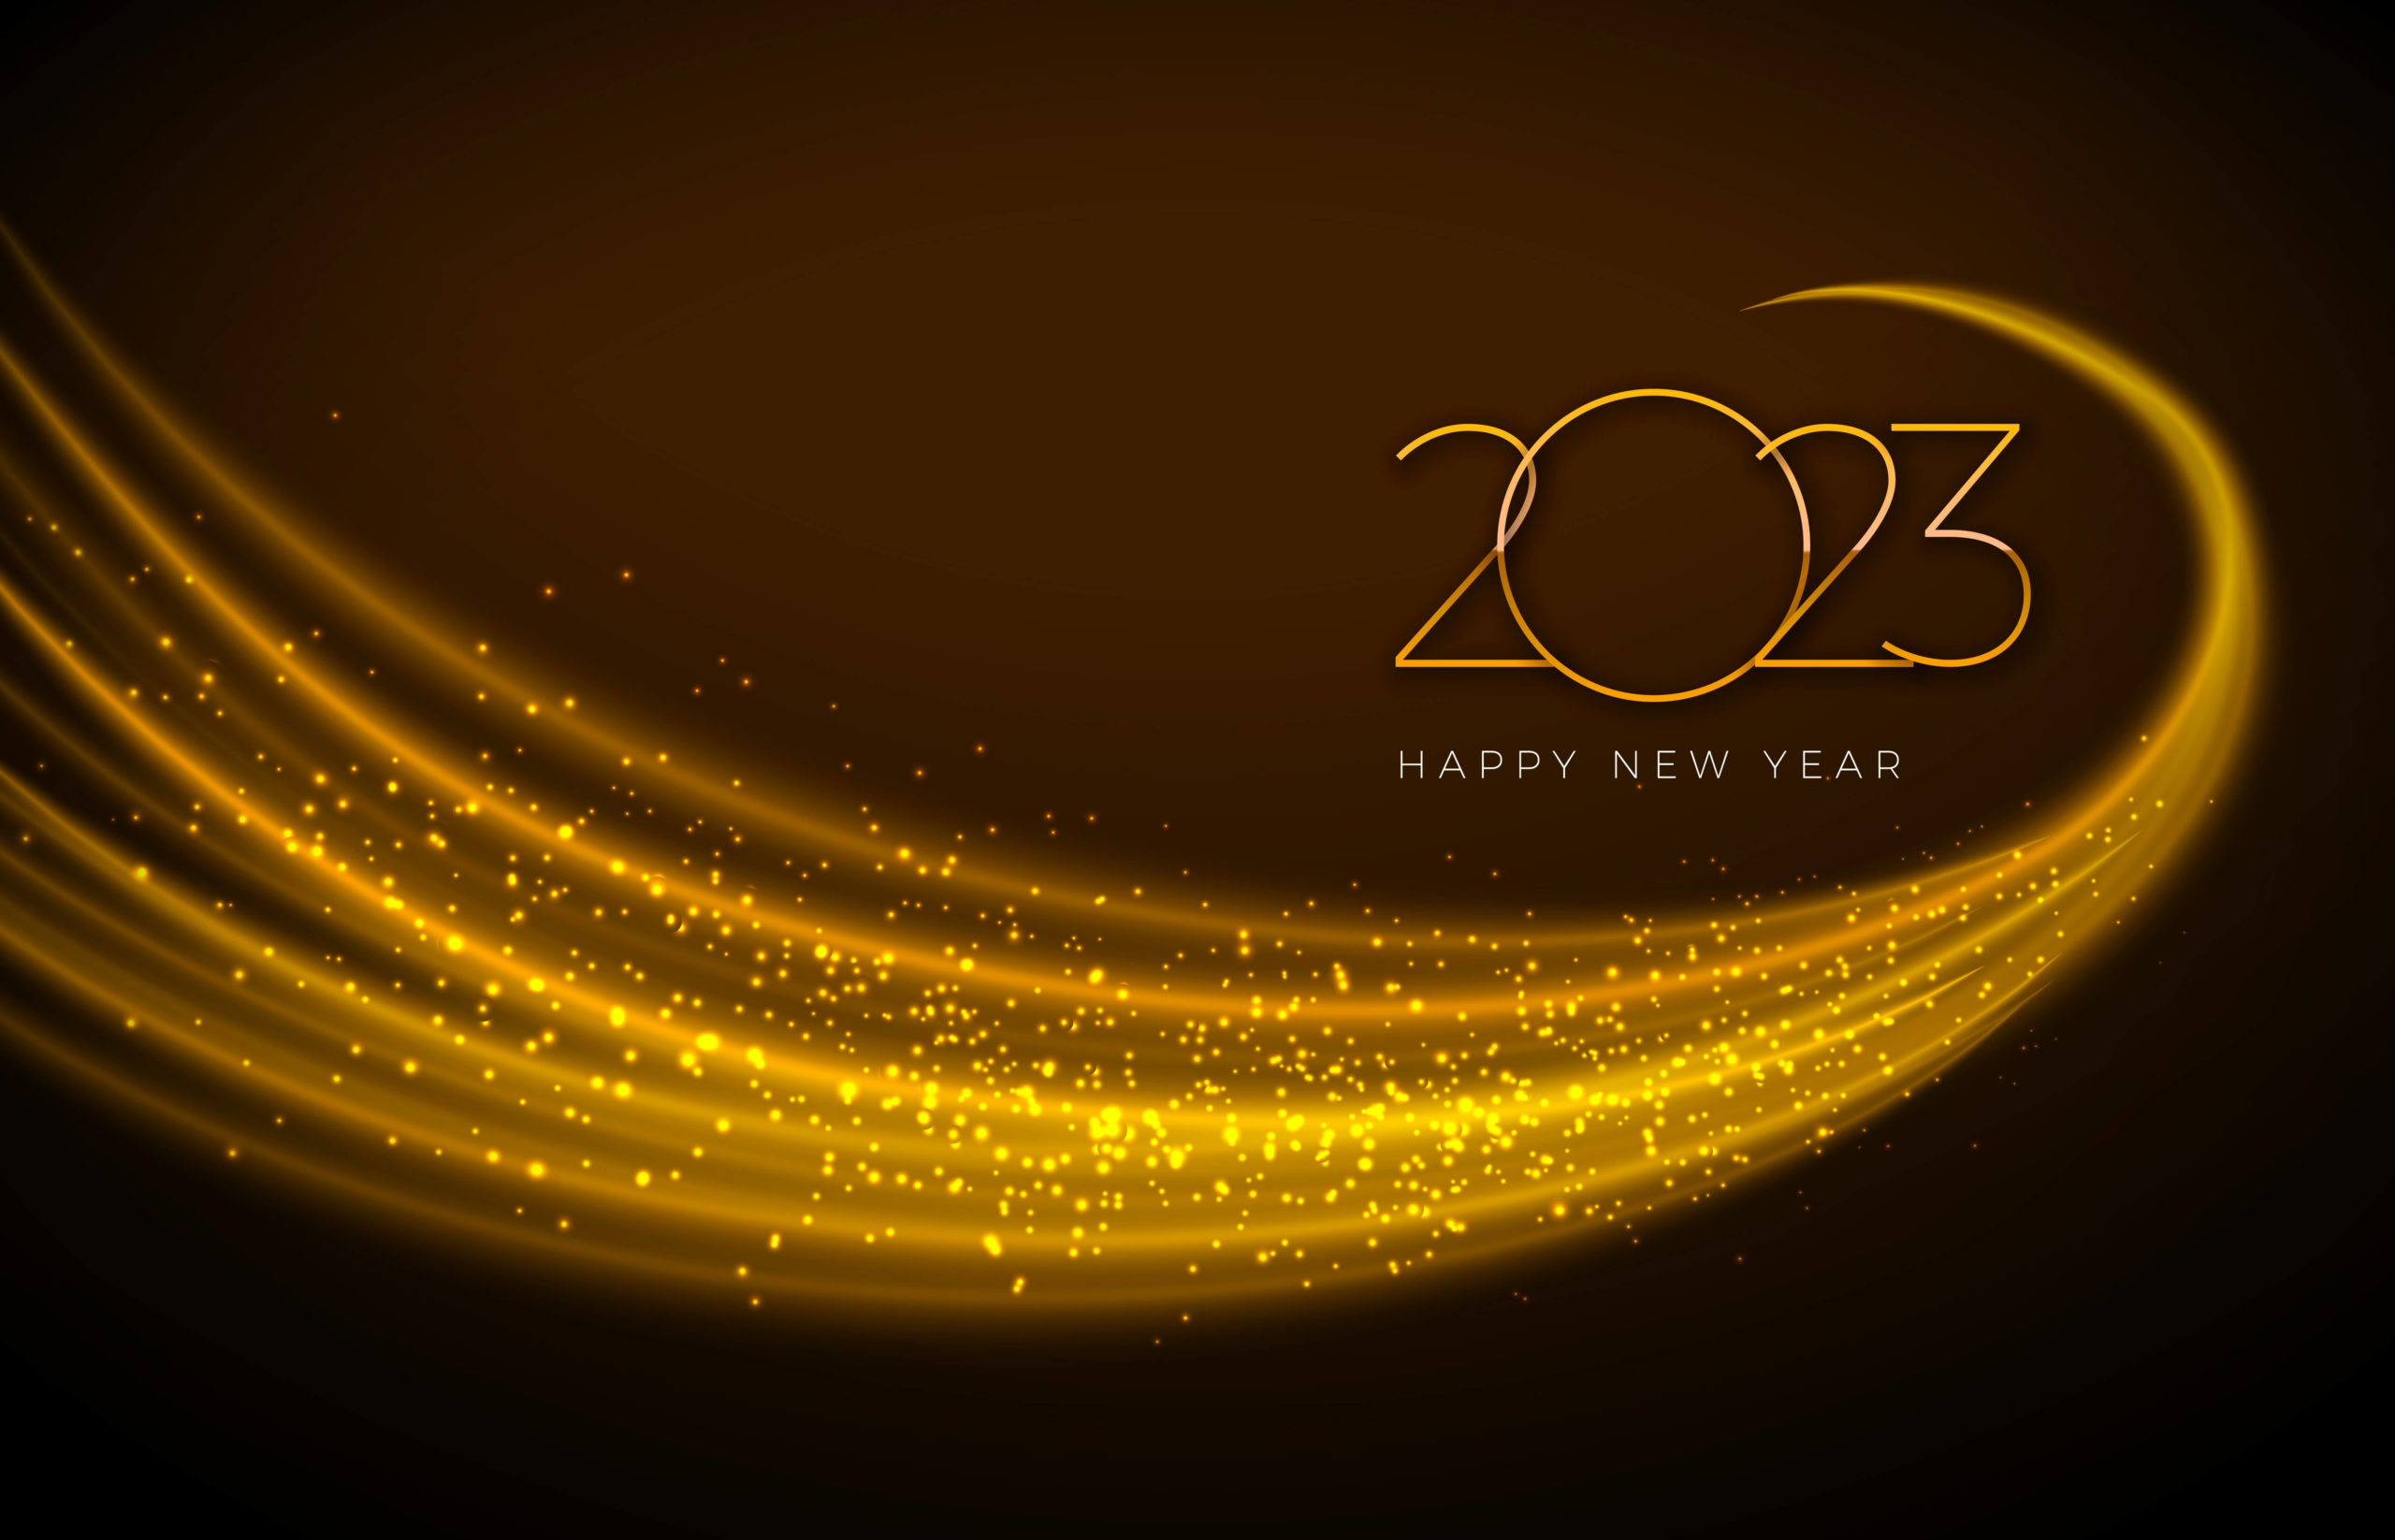 Free Background Happy New Year 2023 Wallpaper HD For Desktop